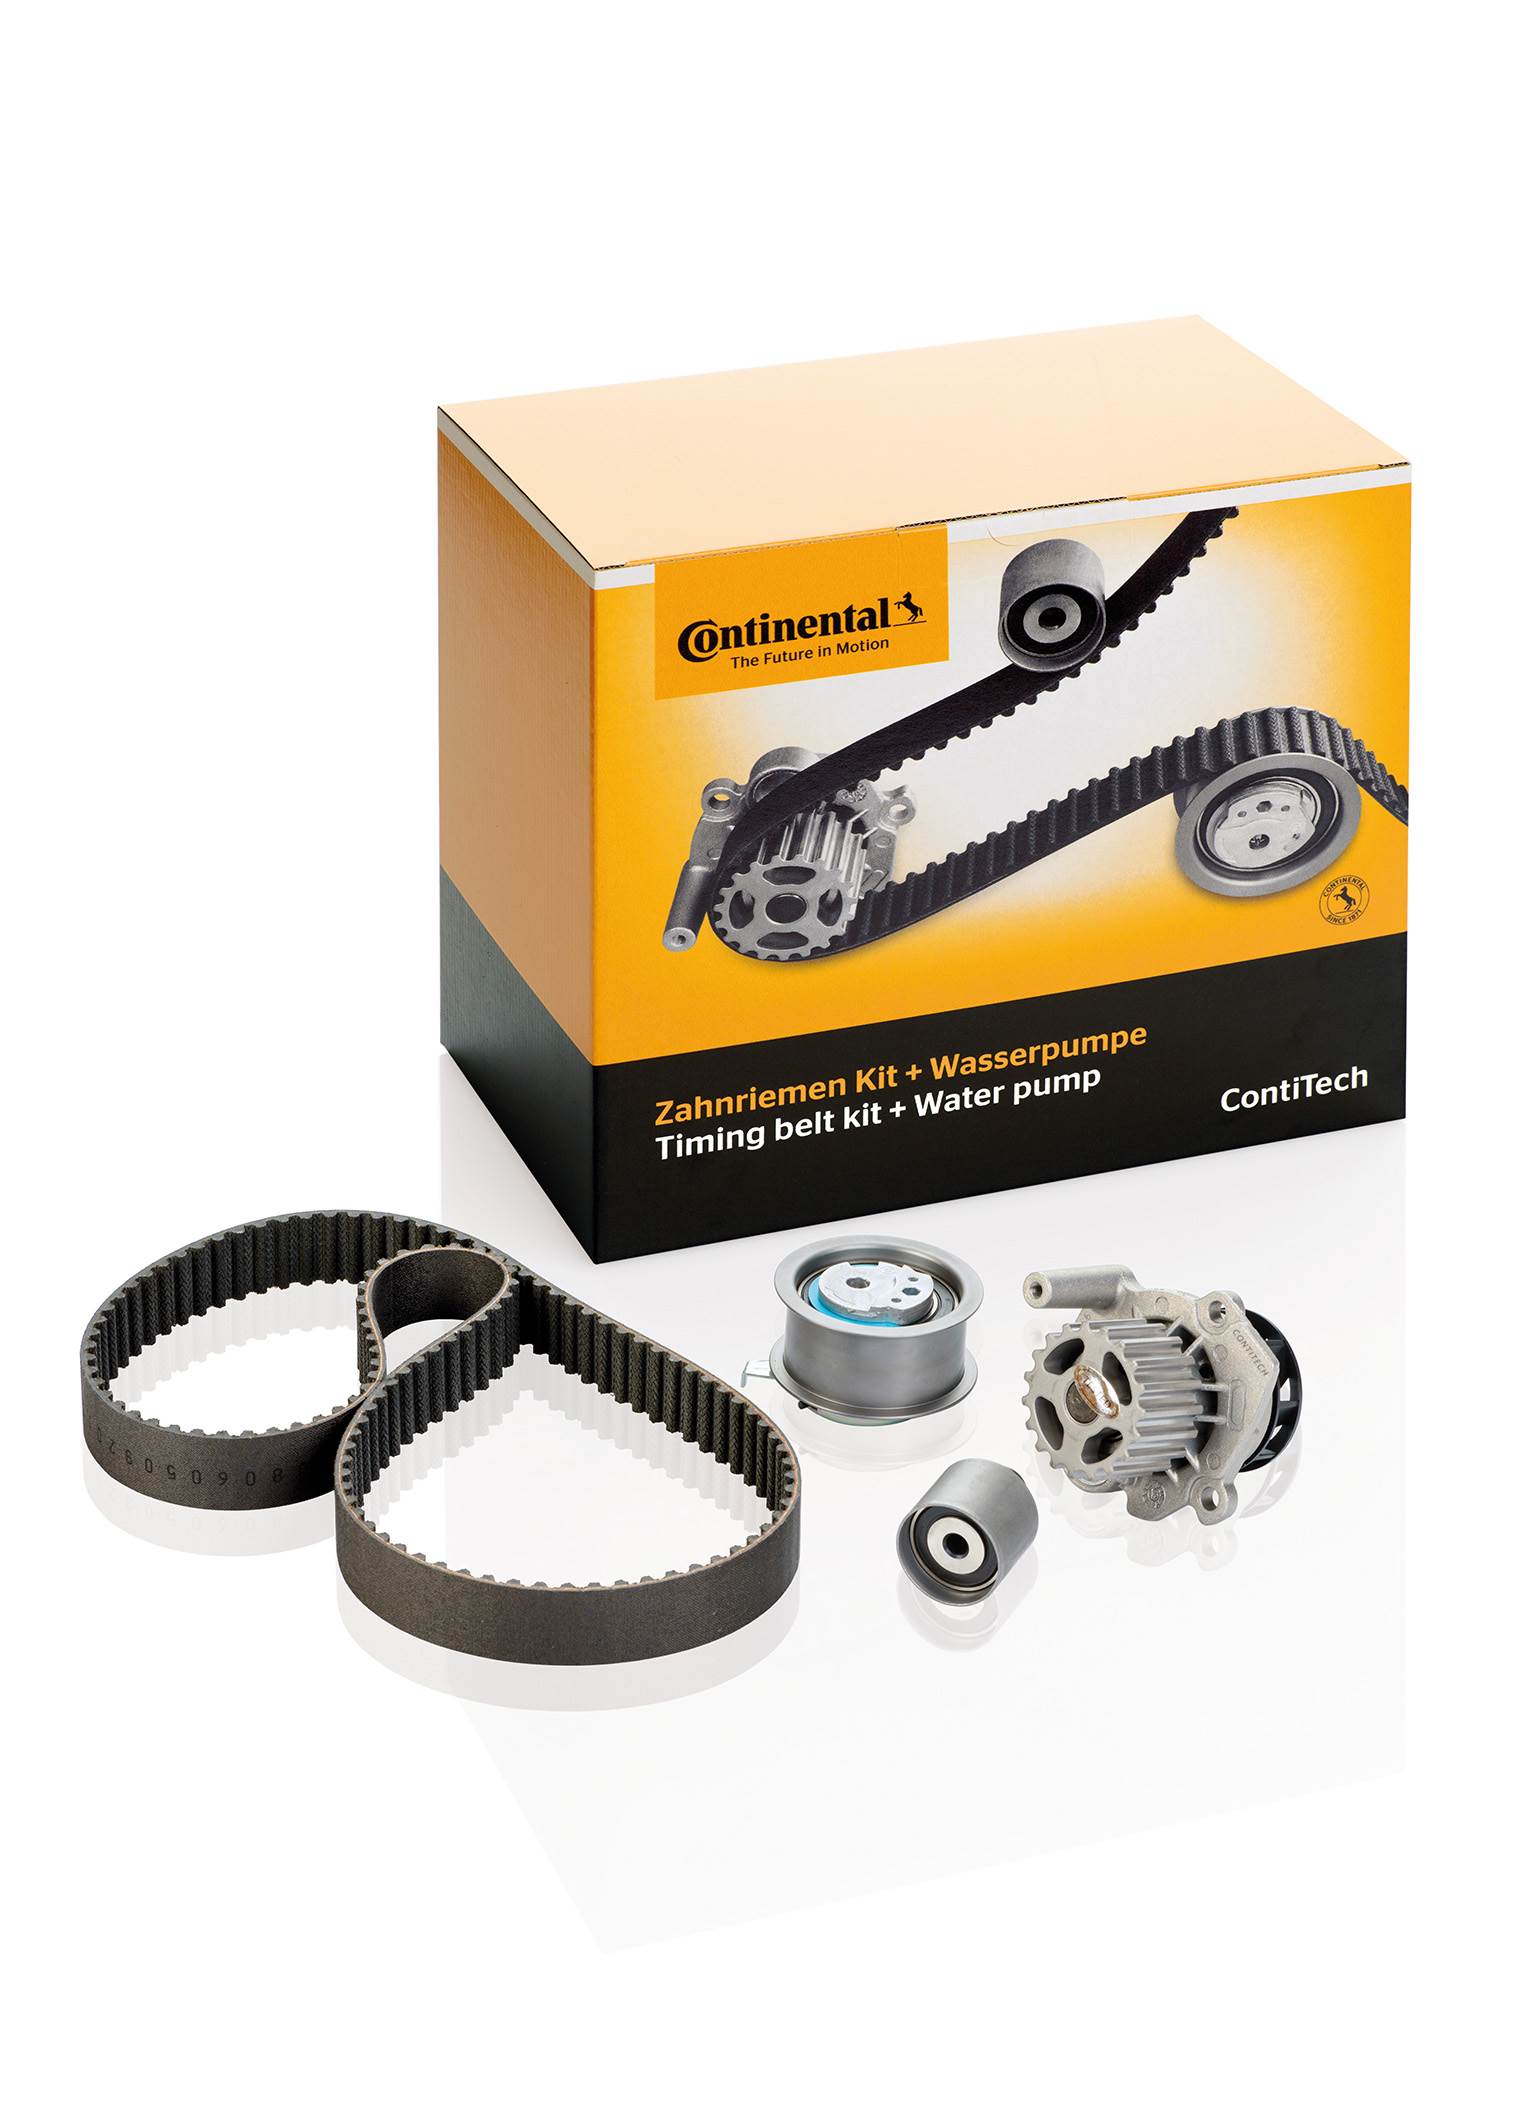 the-contitech-power-transmission-group-now-offers-13-additional-timing-belt-kits-complete-with-water-pumps